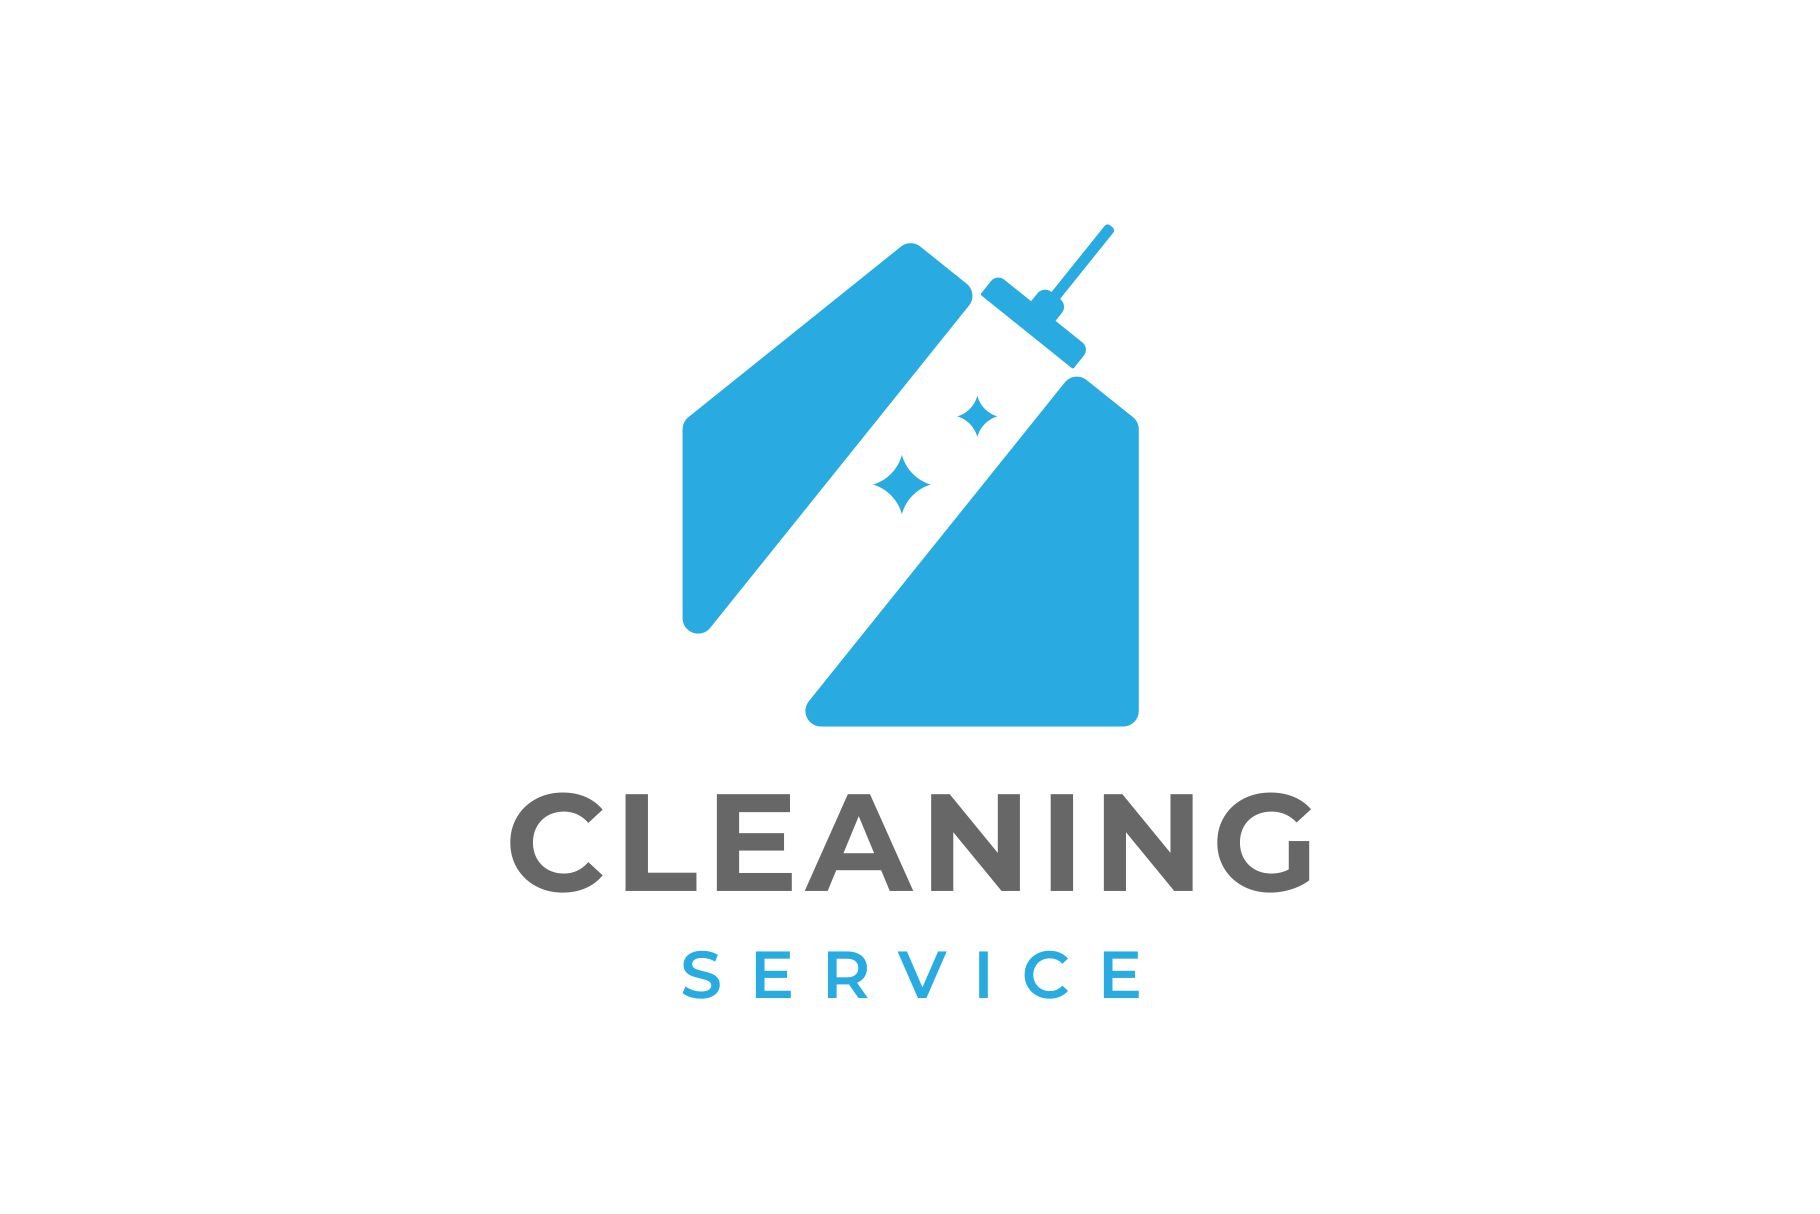 House Cleaning Logo cover image.